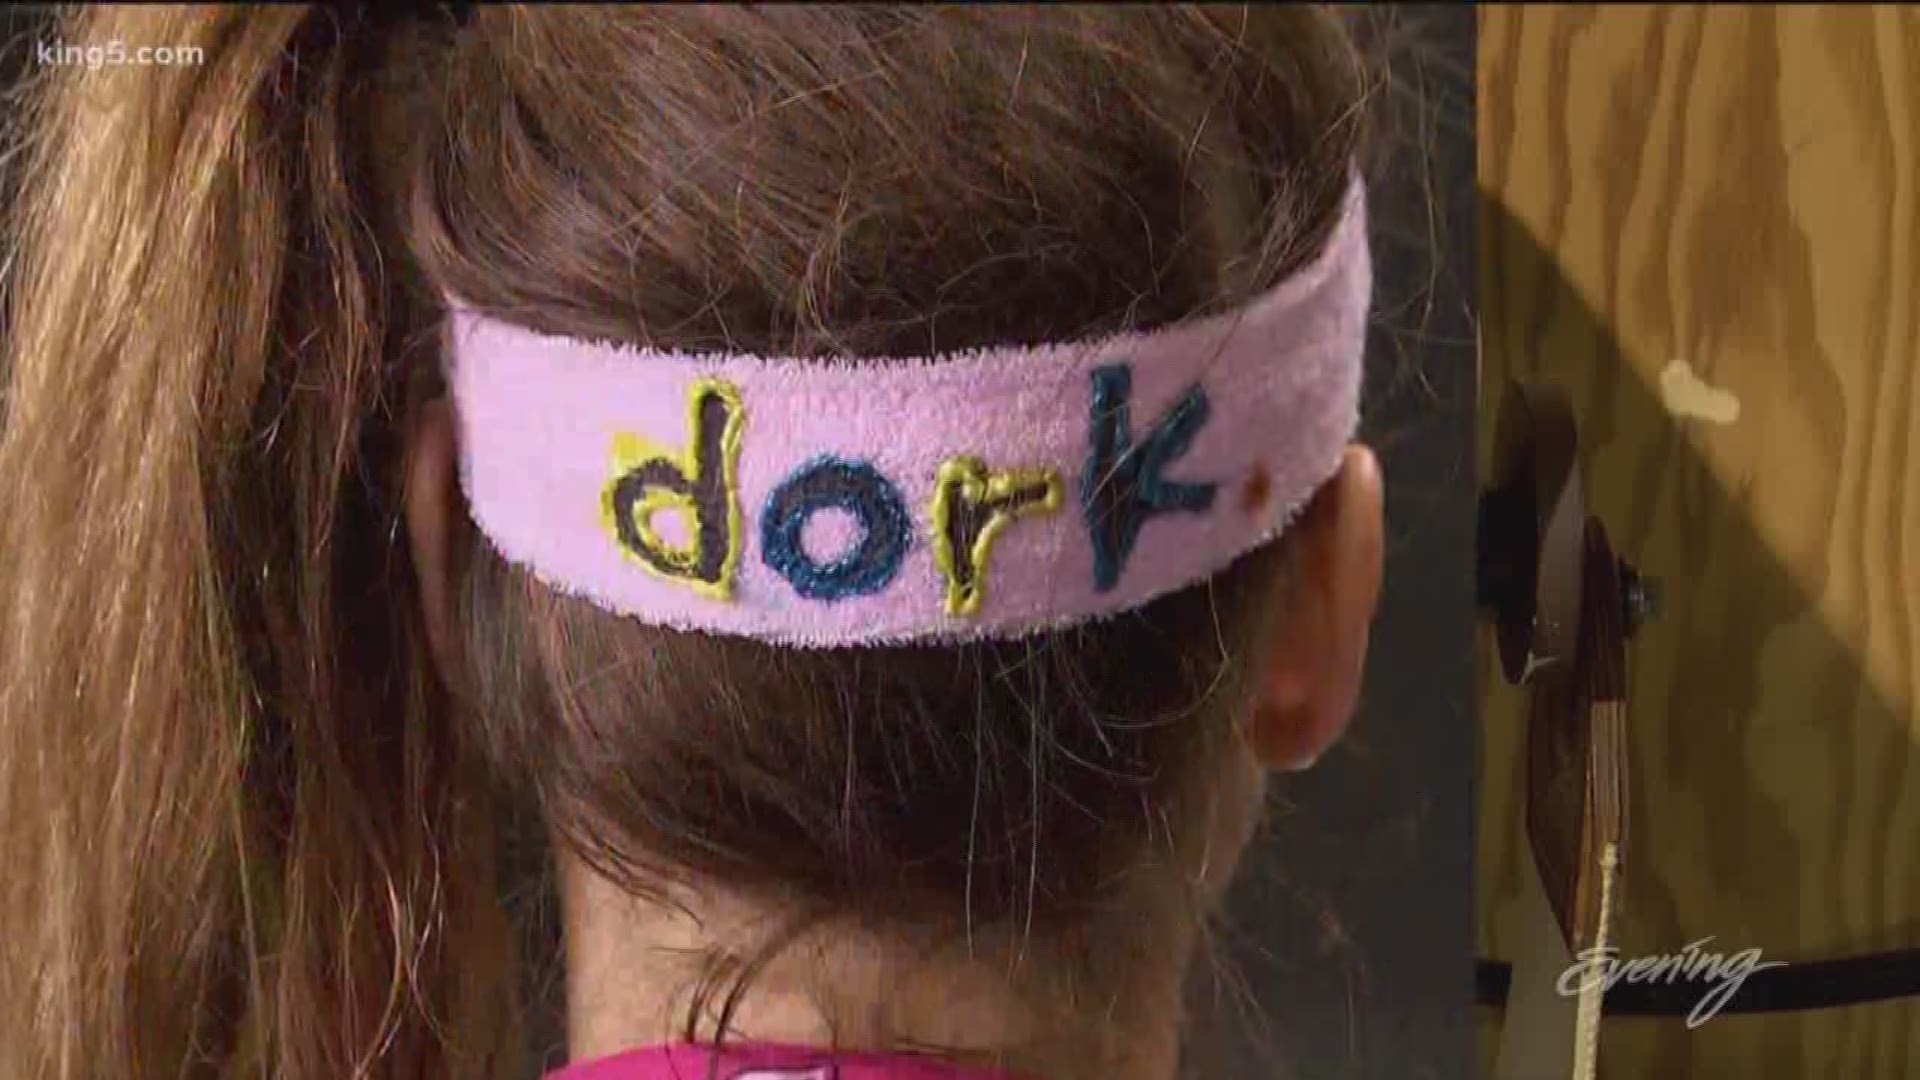 Pull out your 80's workout gear and put on your headband, it's time to get dorky and get a workout at the same time.